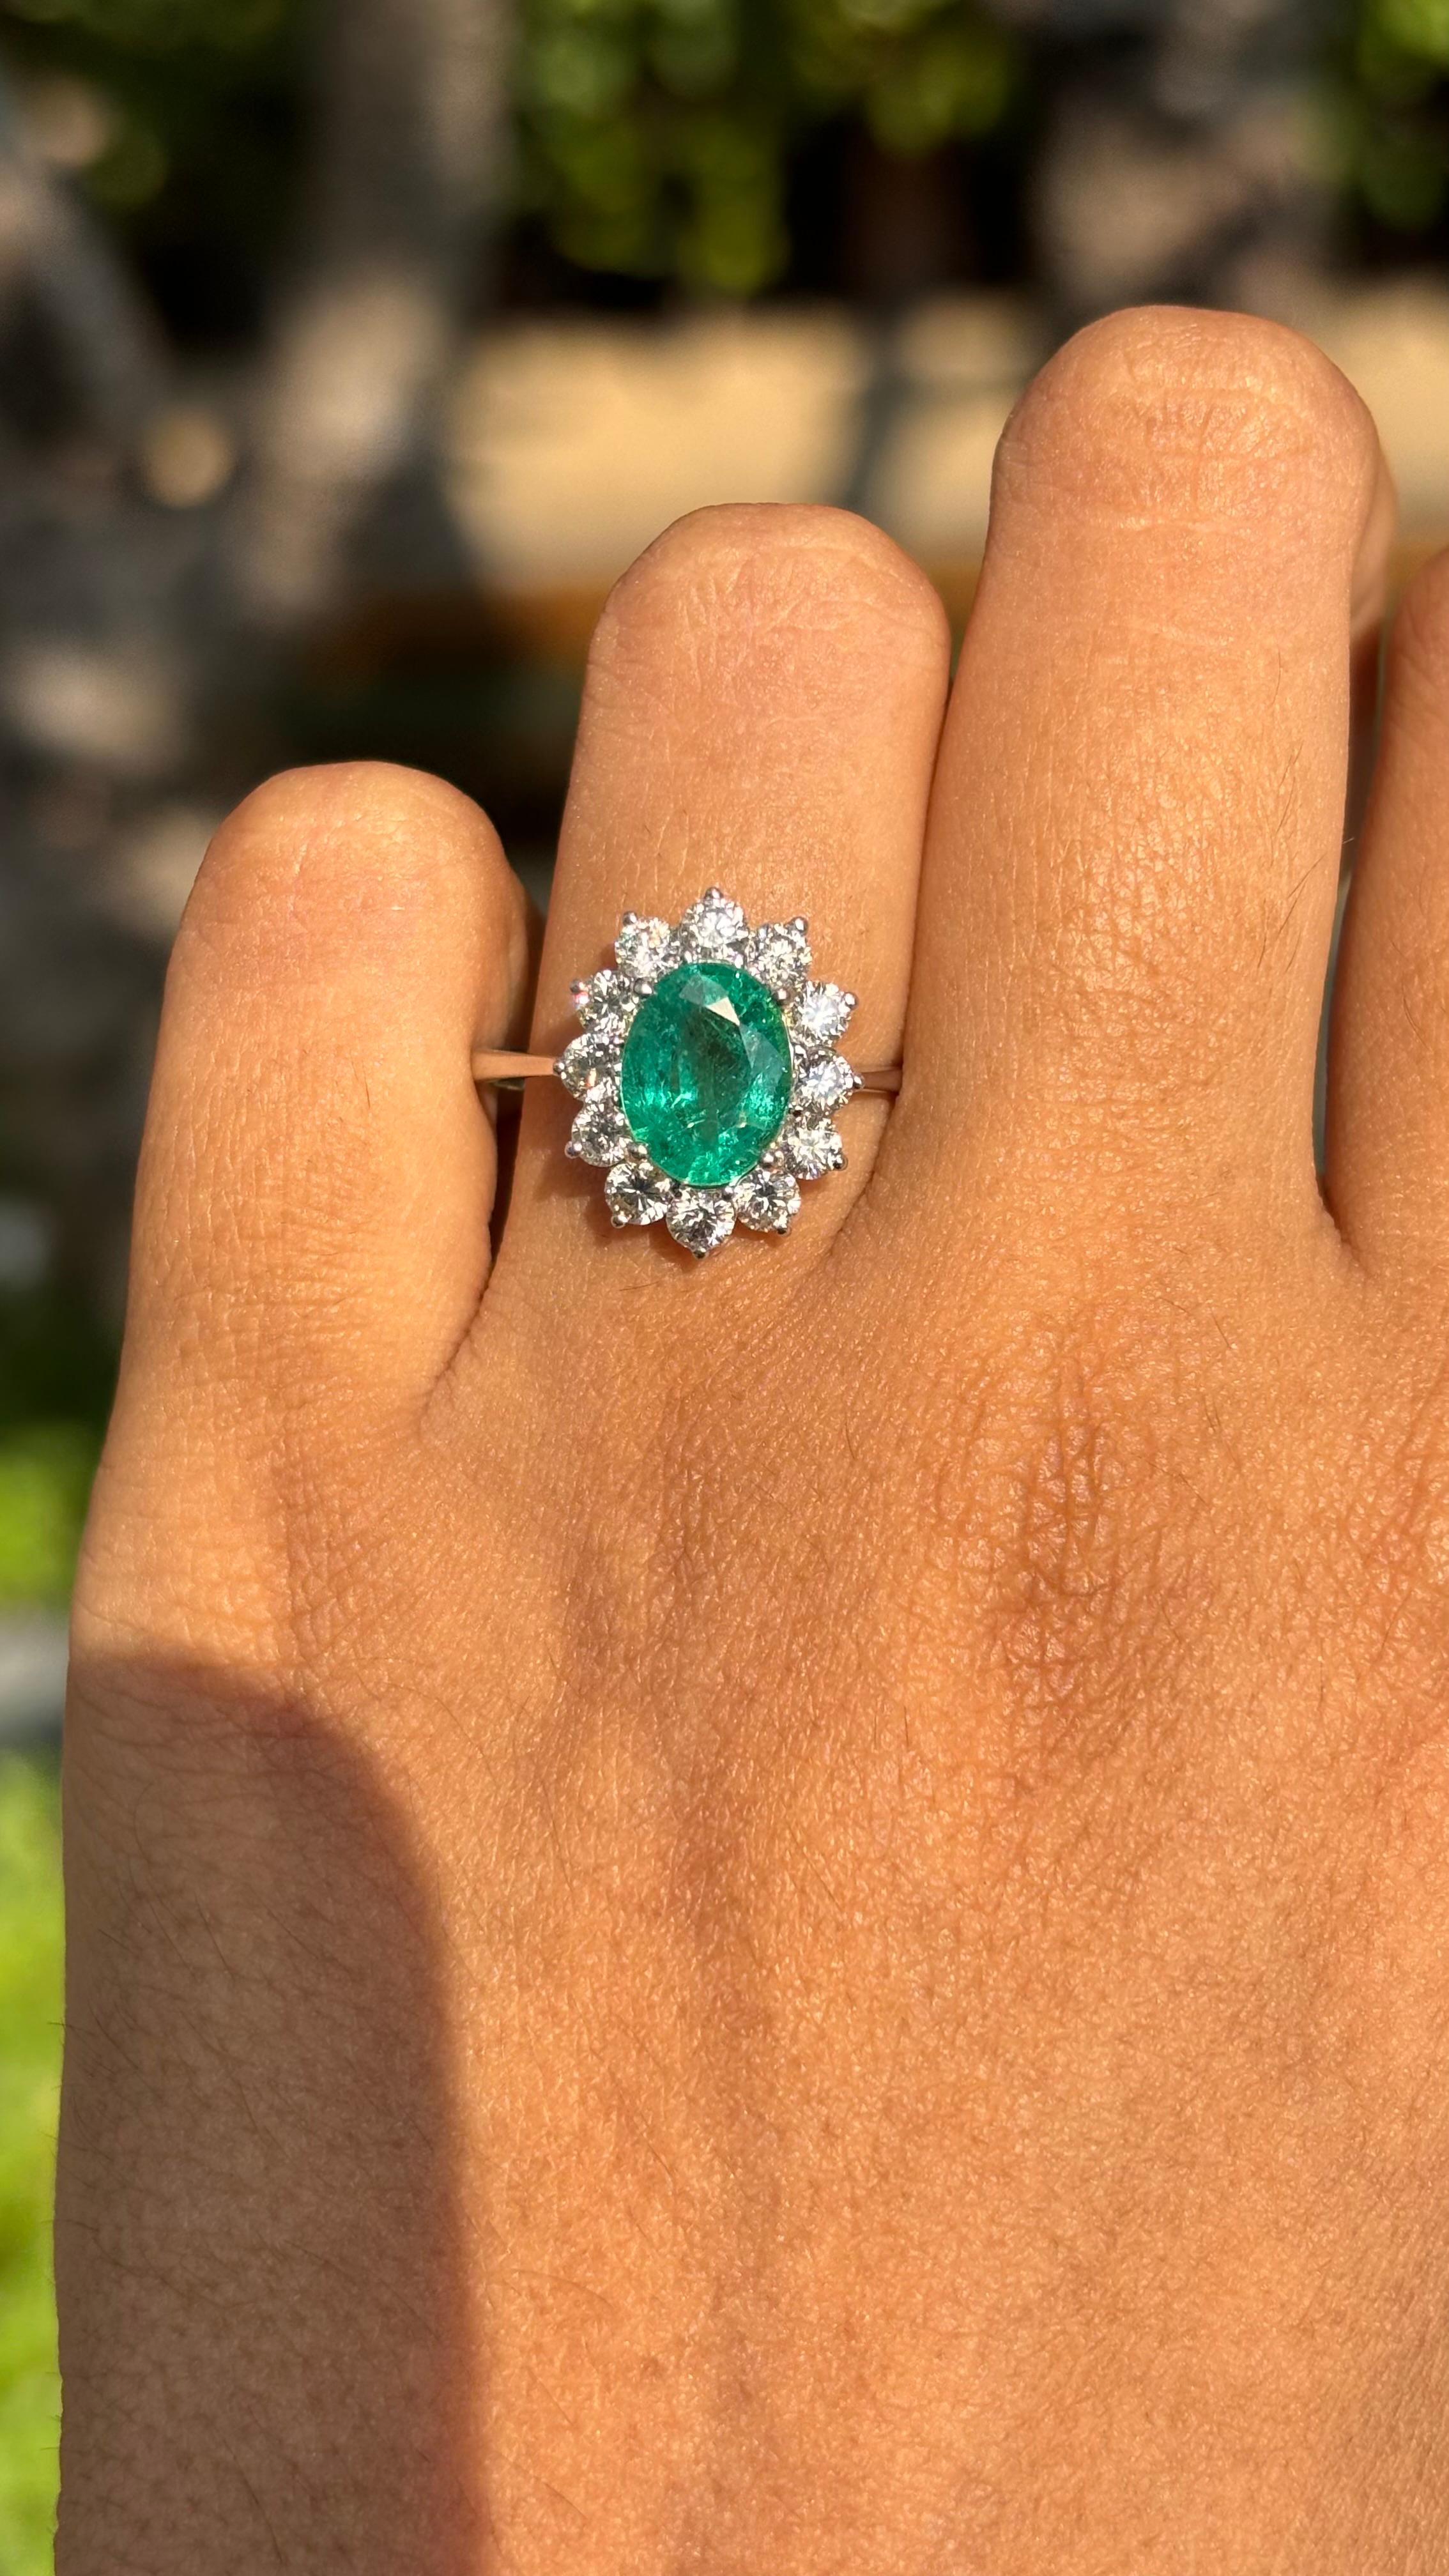 1.64 Ct Vivid Green Zambian Emerald with Halo Diamonds 18K White Gold Ring For Sale 4